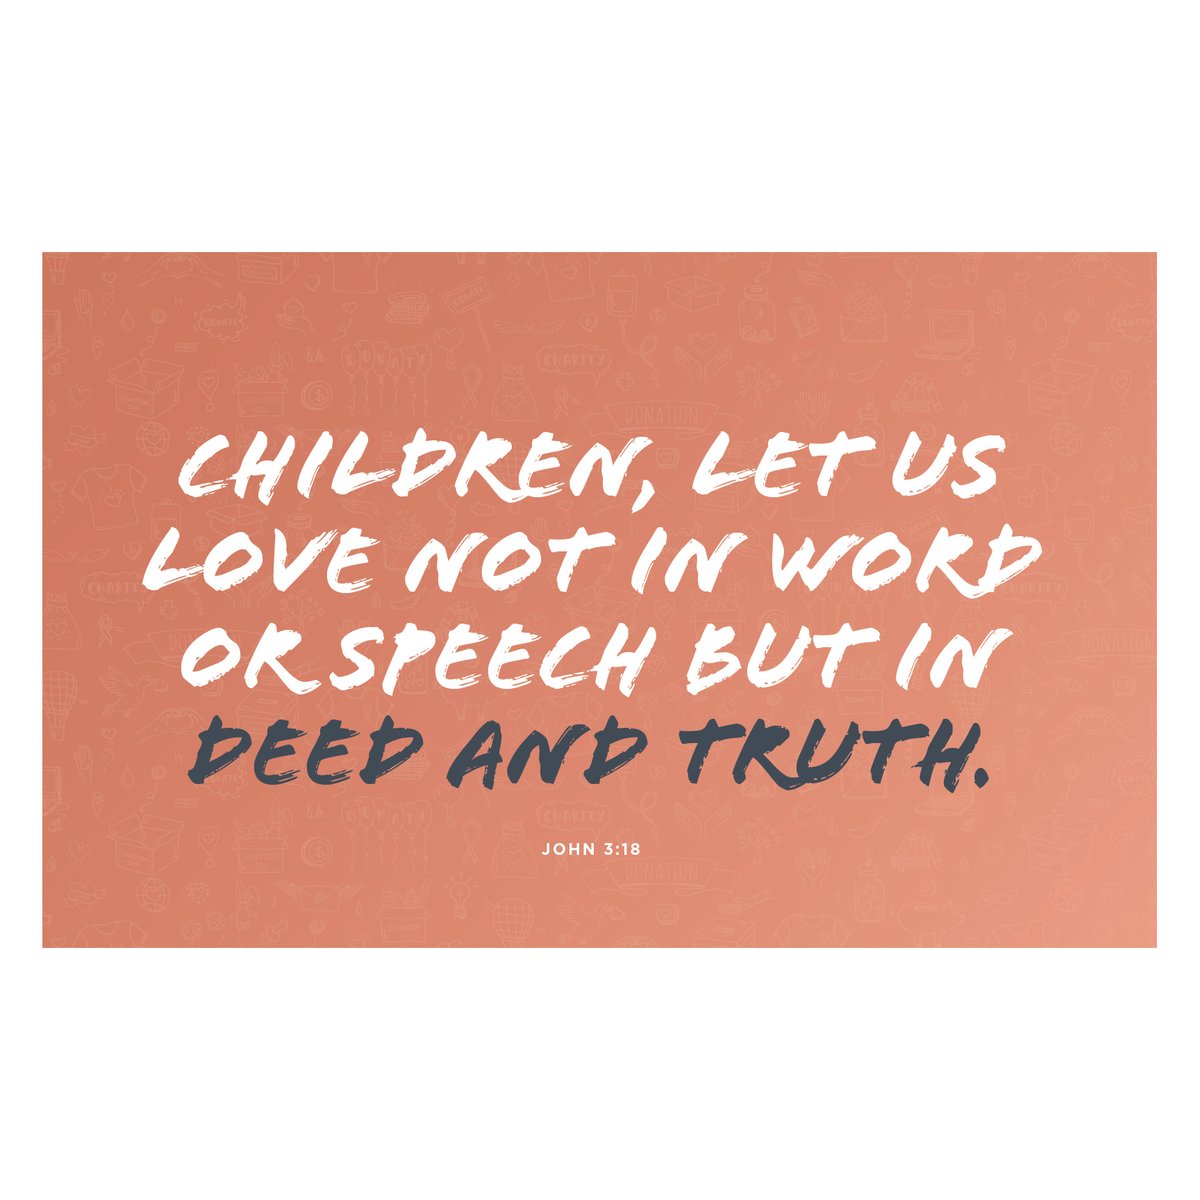 Let Us Love Not in Word or Speech but in Deed and Truth. John 3:18